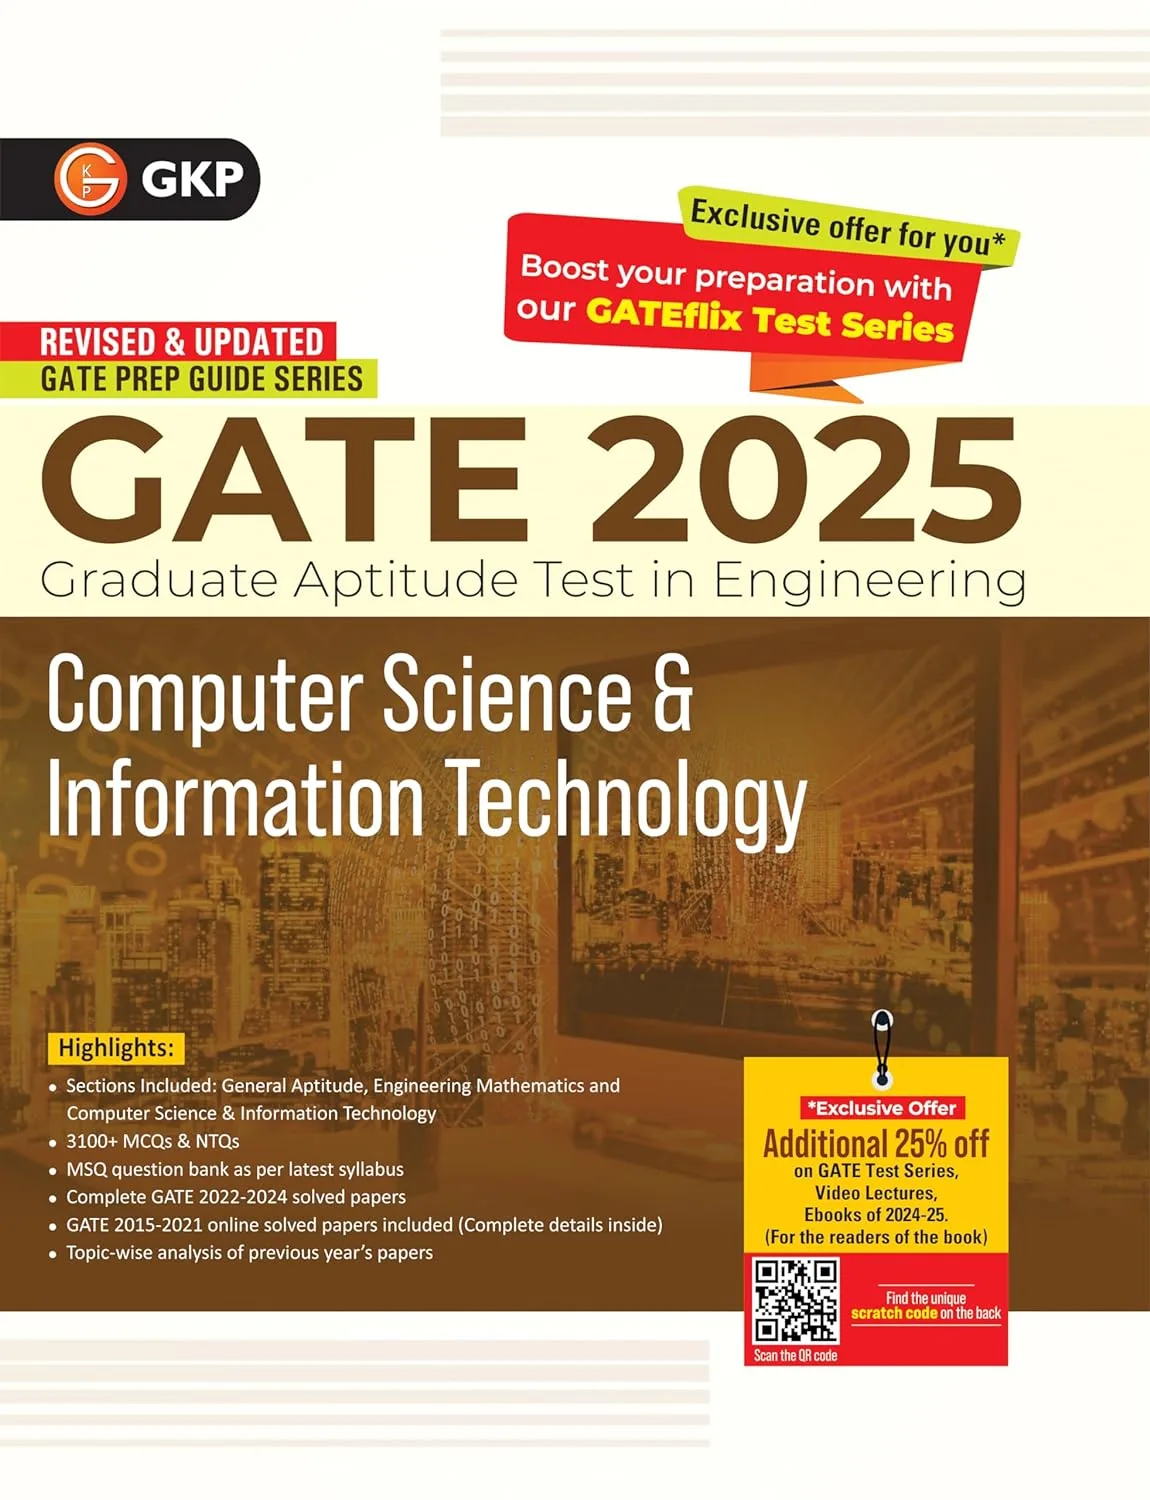 gate 2025 computer science & information technology